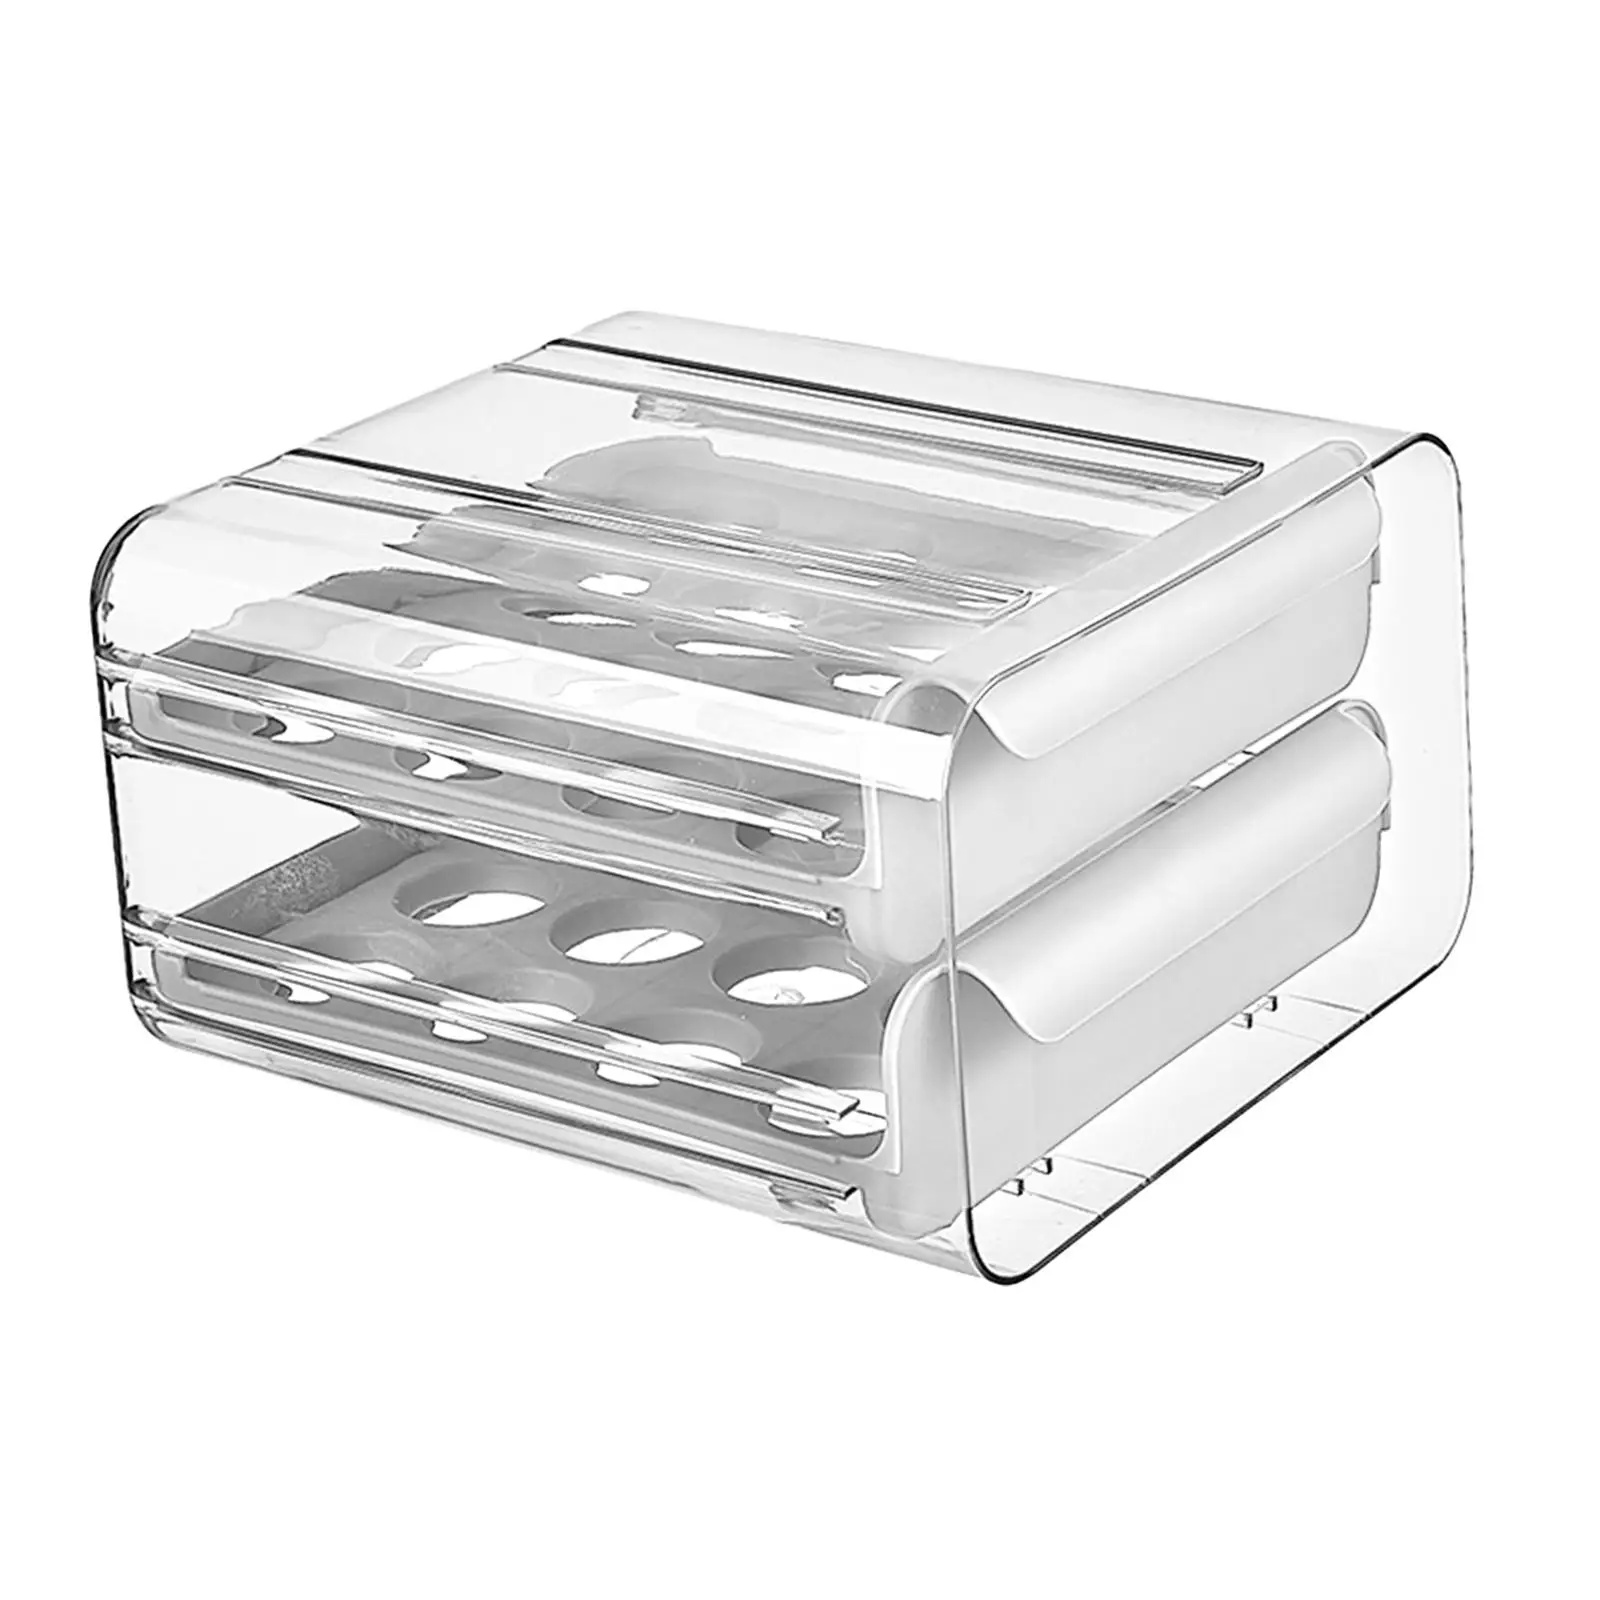 Drawer Type Eggs Holder, Fridge Egg Drawer Organizer, 2 Layers Pull Out Refrigerator Egg Container, 32 Egg Trays Large Capacity